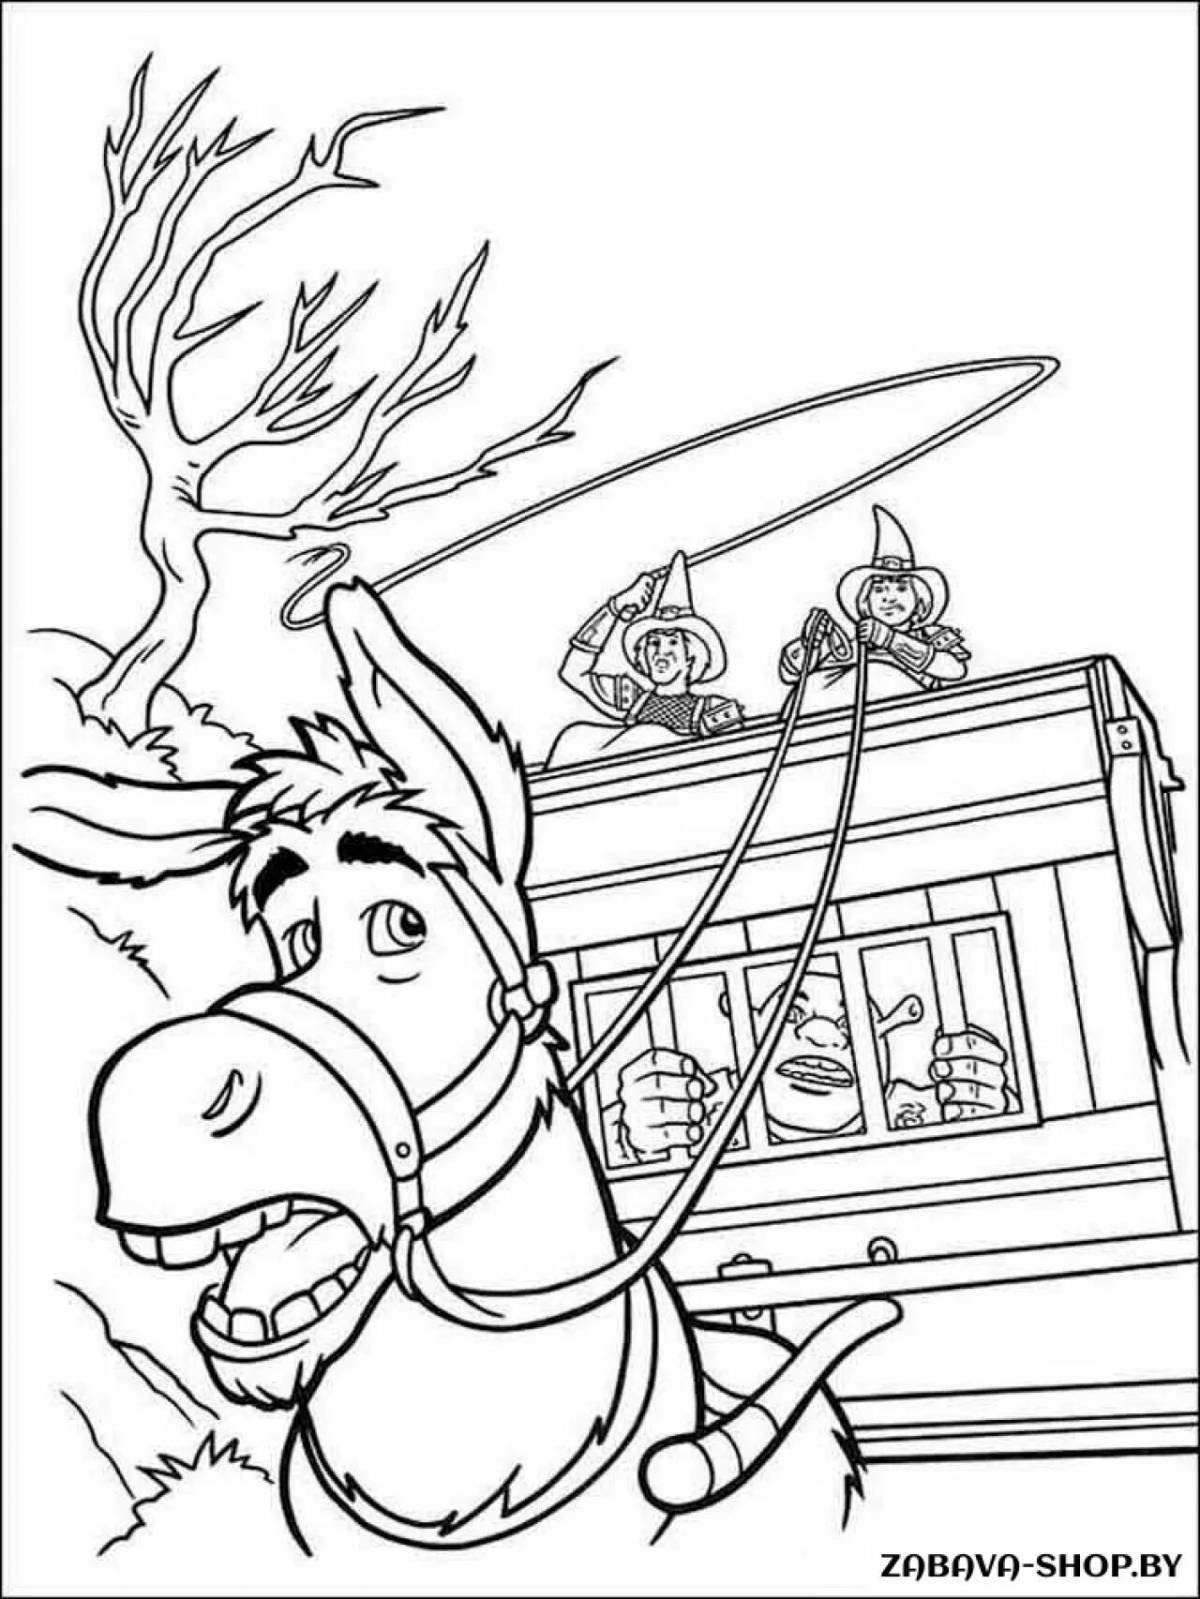 Adorable Donkey Coloring Page from Shrek